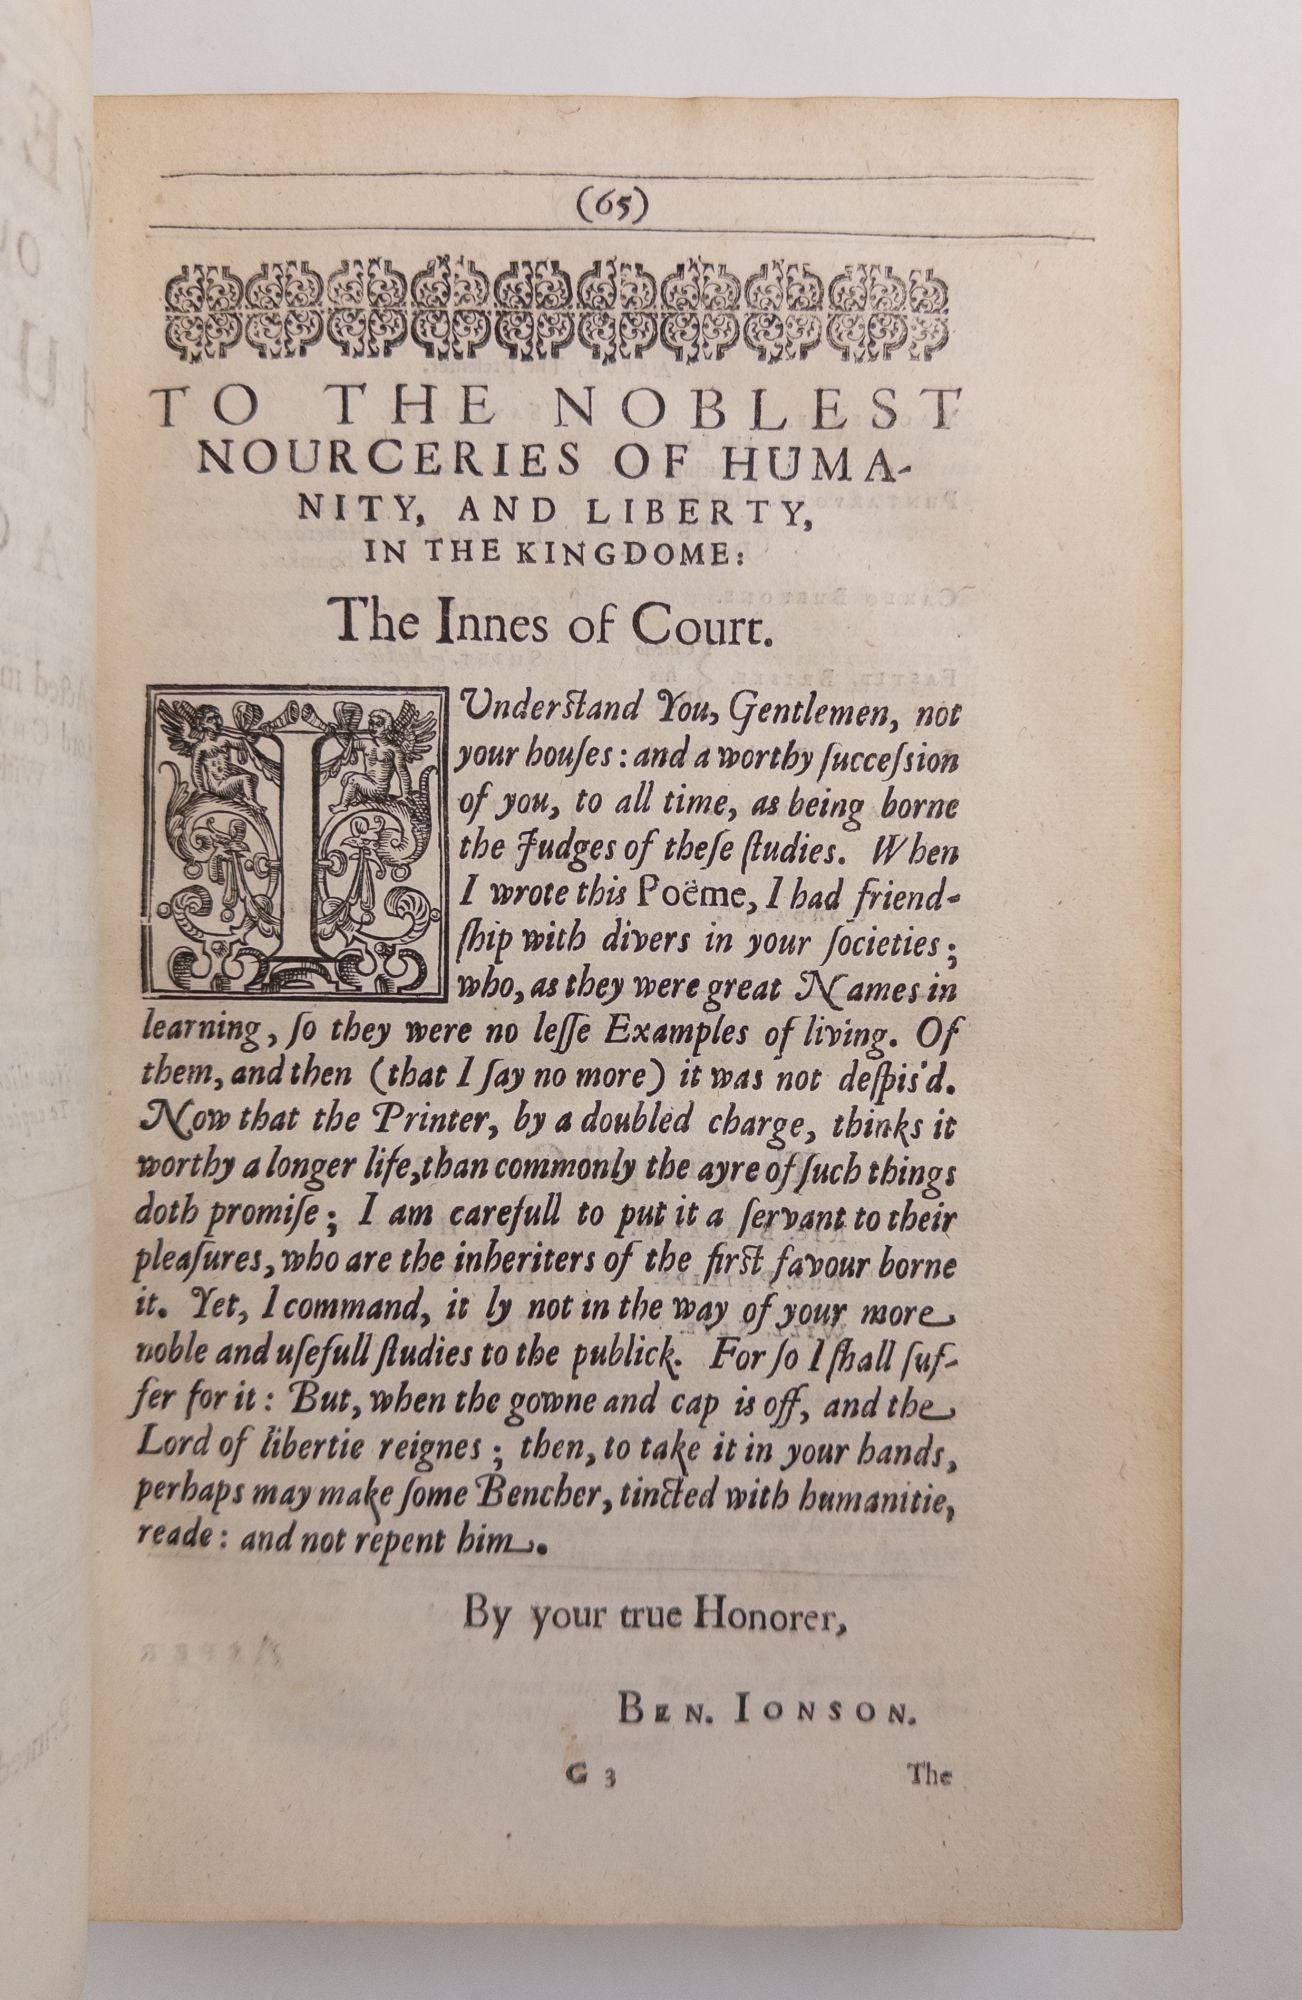 Product Image for THE WORKES OF BENJAMIN JONSON [Two volumes]